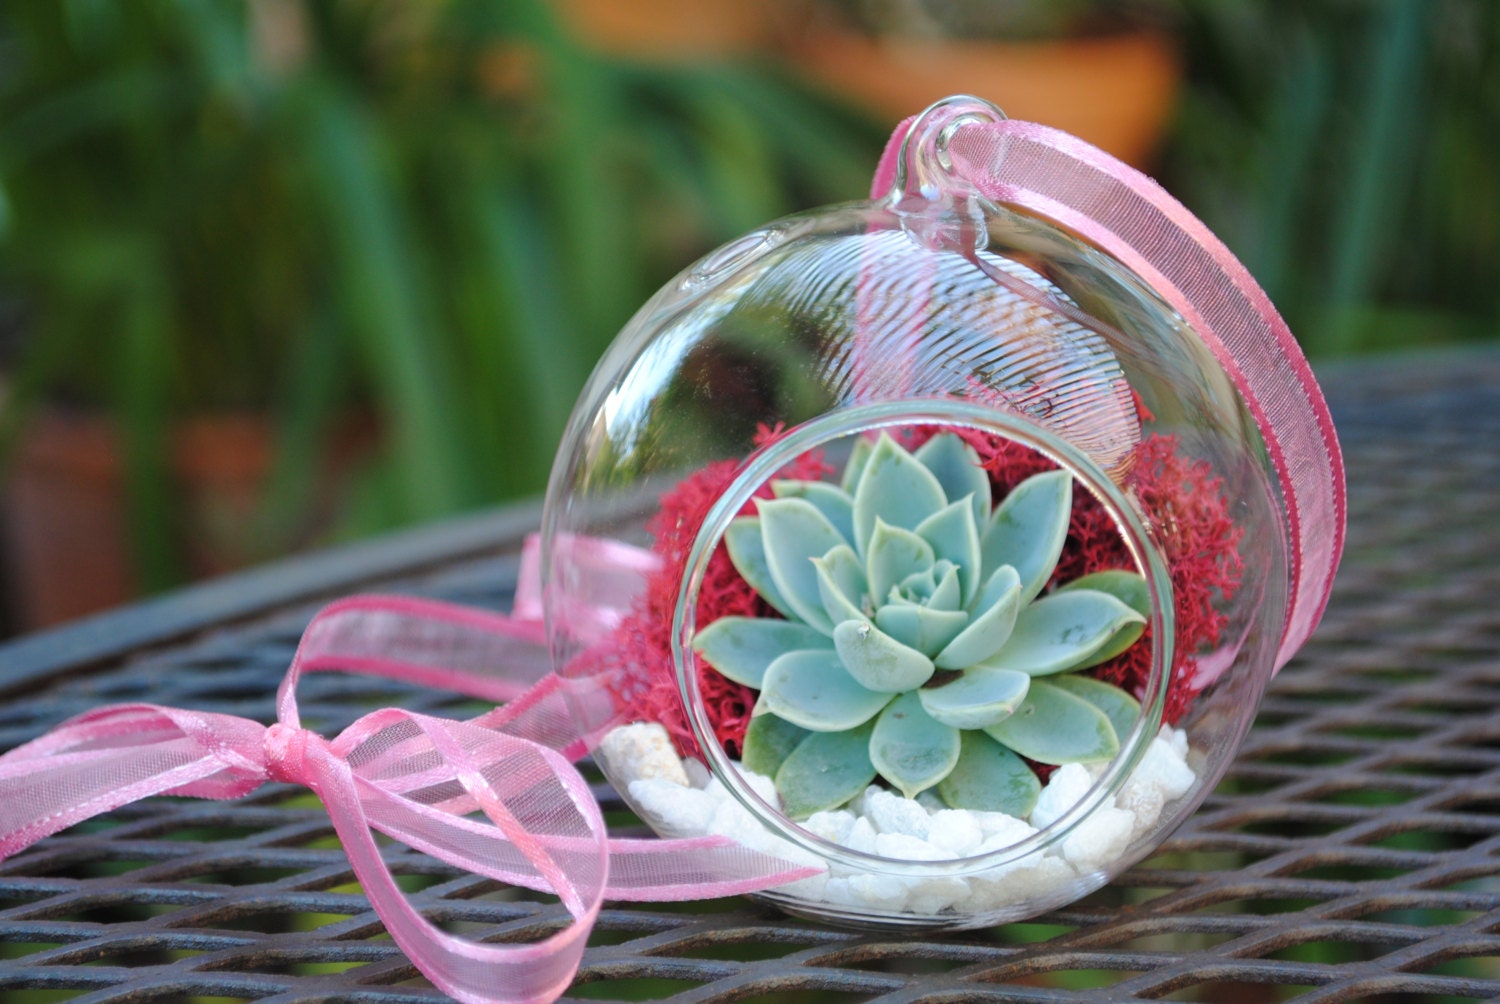 Valentine's Terrarium SPECIAL- FREE shipping for limited time - One DIY kit with glass orb, succulent, pink moss and white pebbles - SucculentsAndMore1